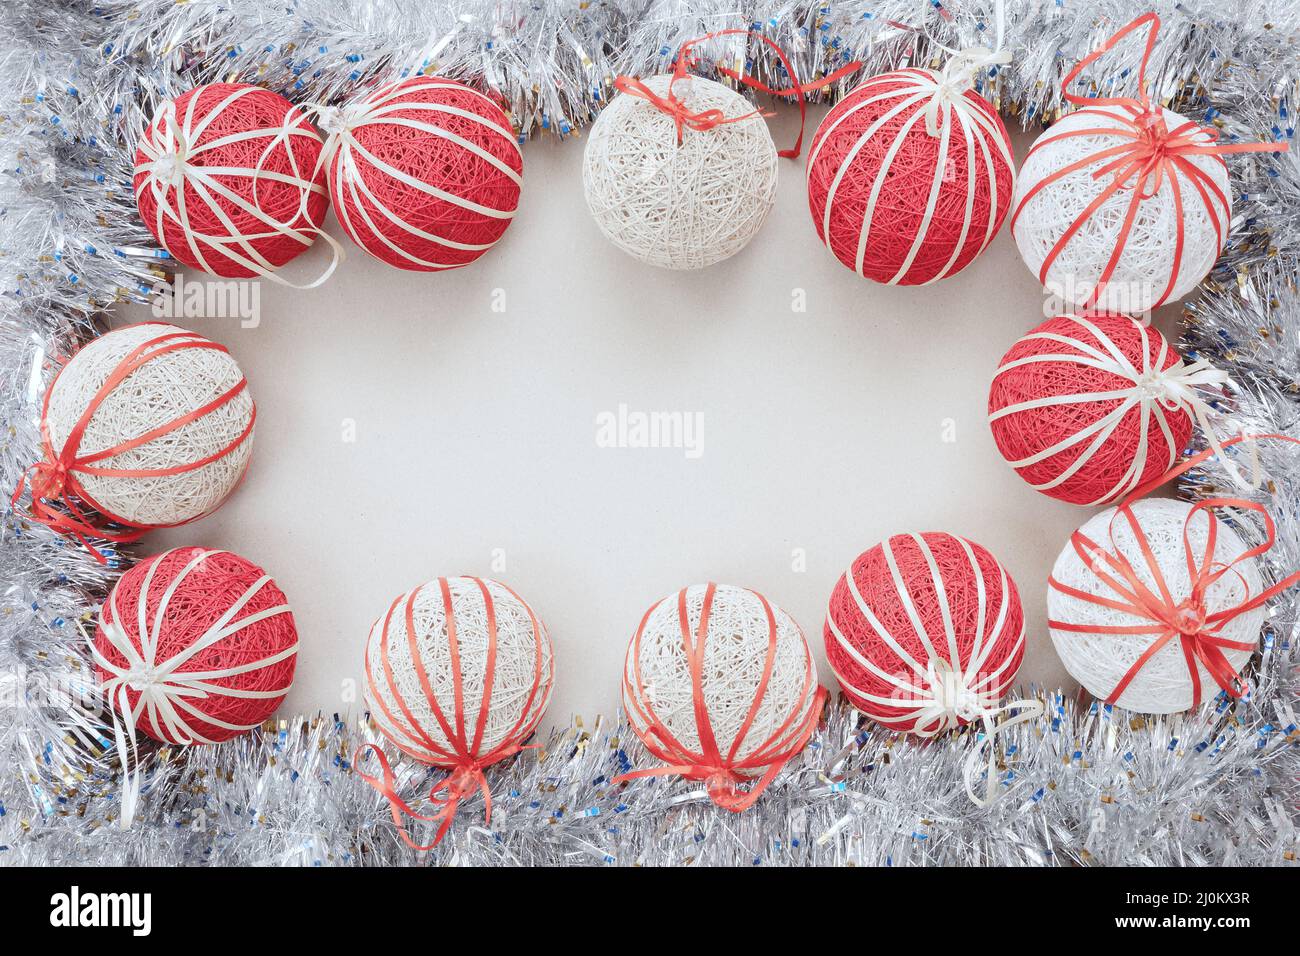 Shiny silver tinsel with white and red Christmas balls borders a blank white background. Top view Stock Photo